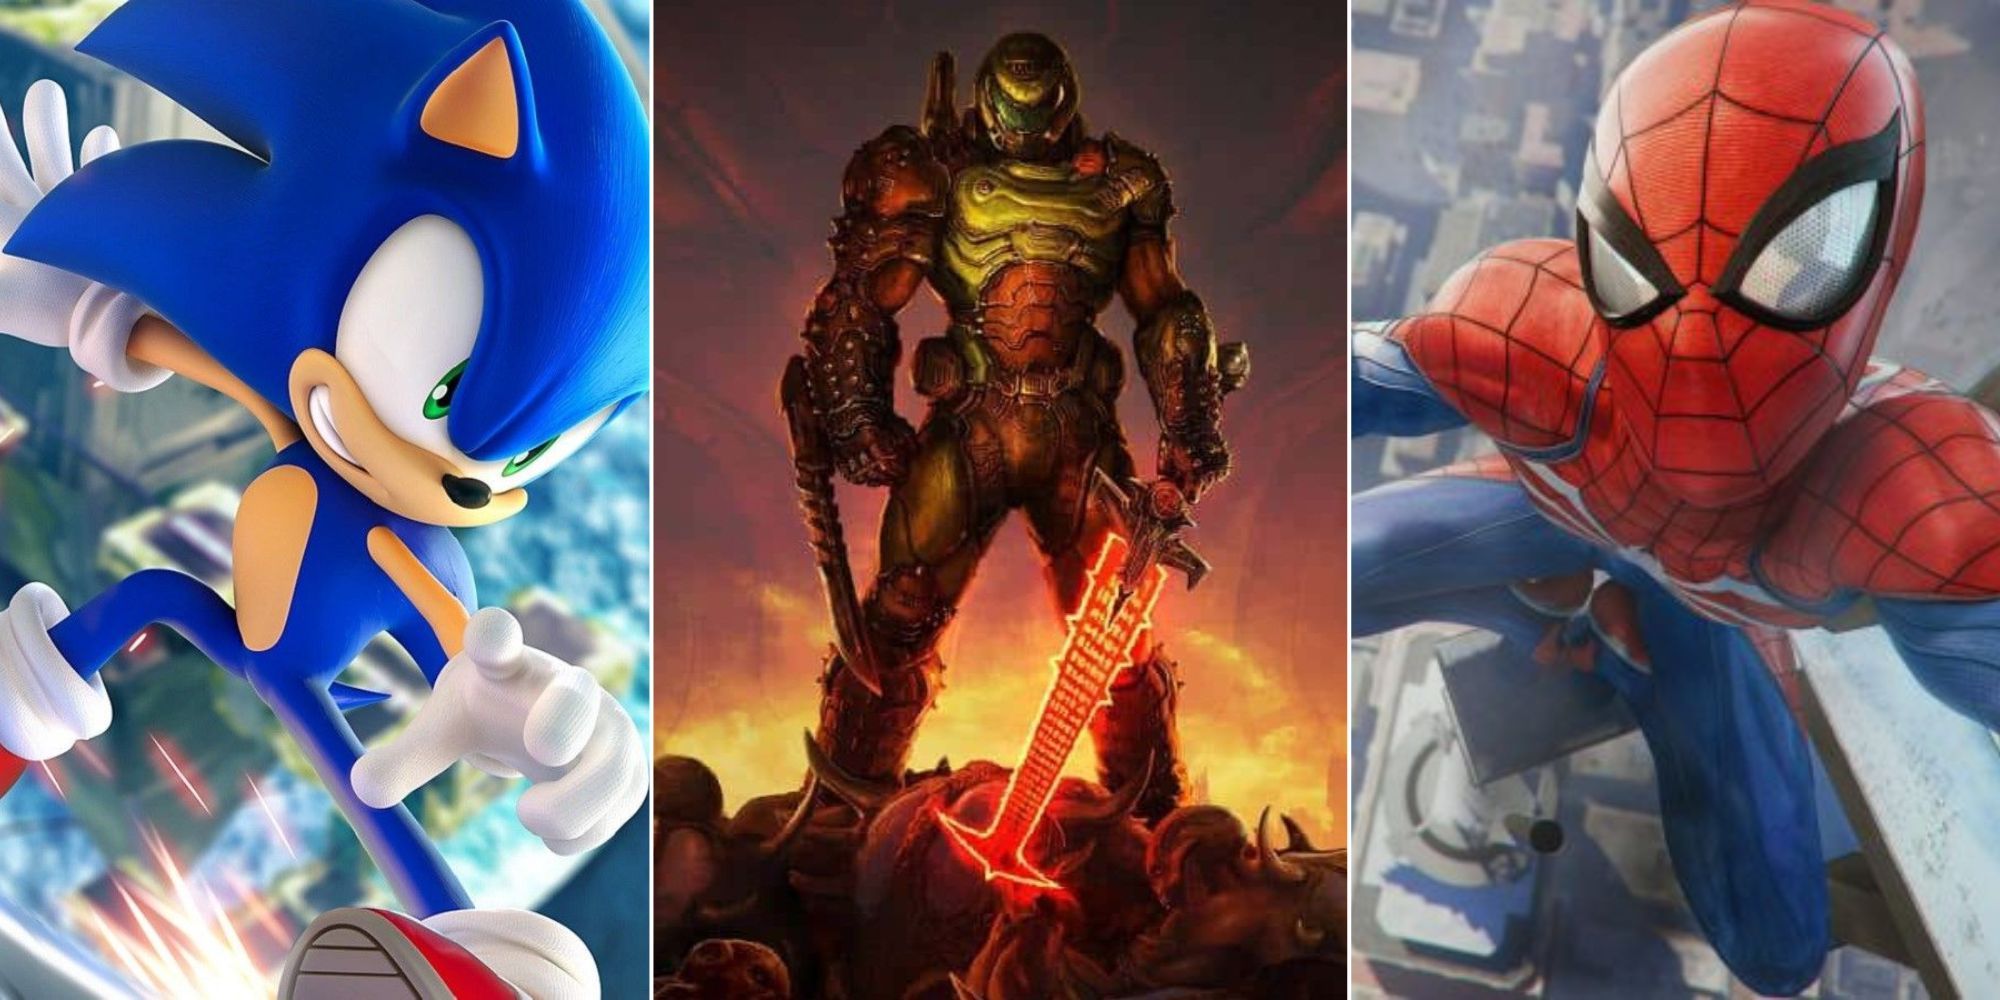 split image of sonic the hedgehog, the doomslayer and spiderman